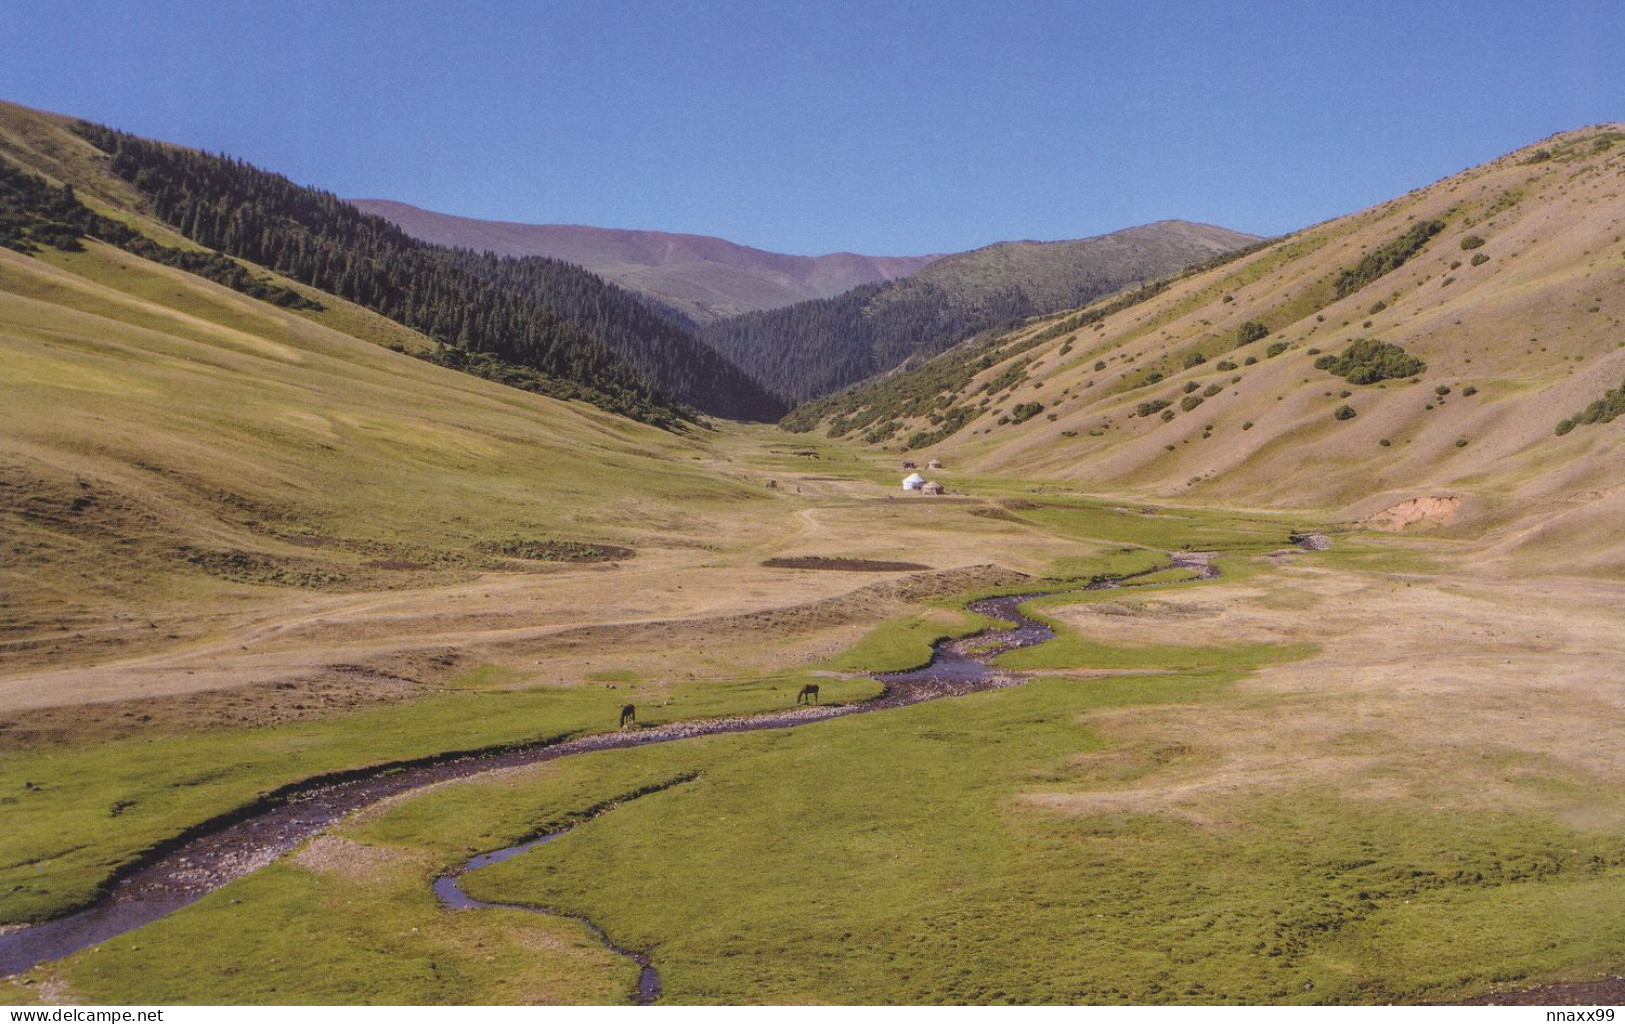 Mongolia - Orkhon Valley Cultural Landscape, UNESCO WHS In SCO Family, China's Postcard - Mongolei